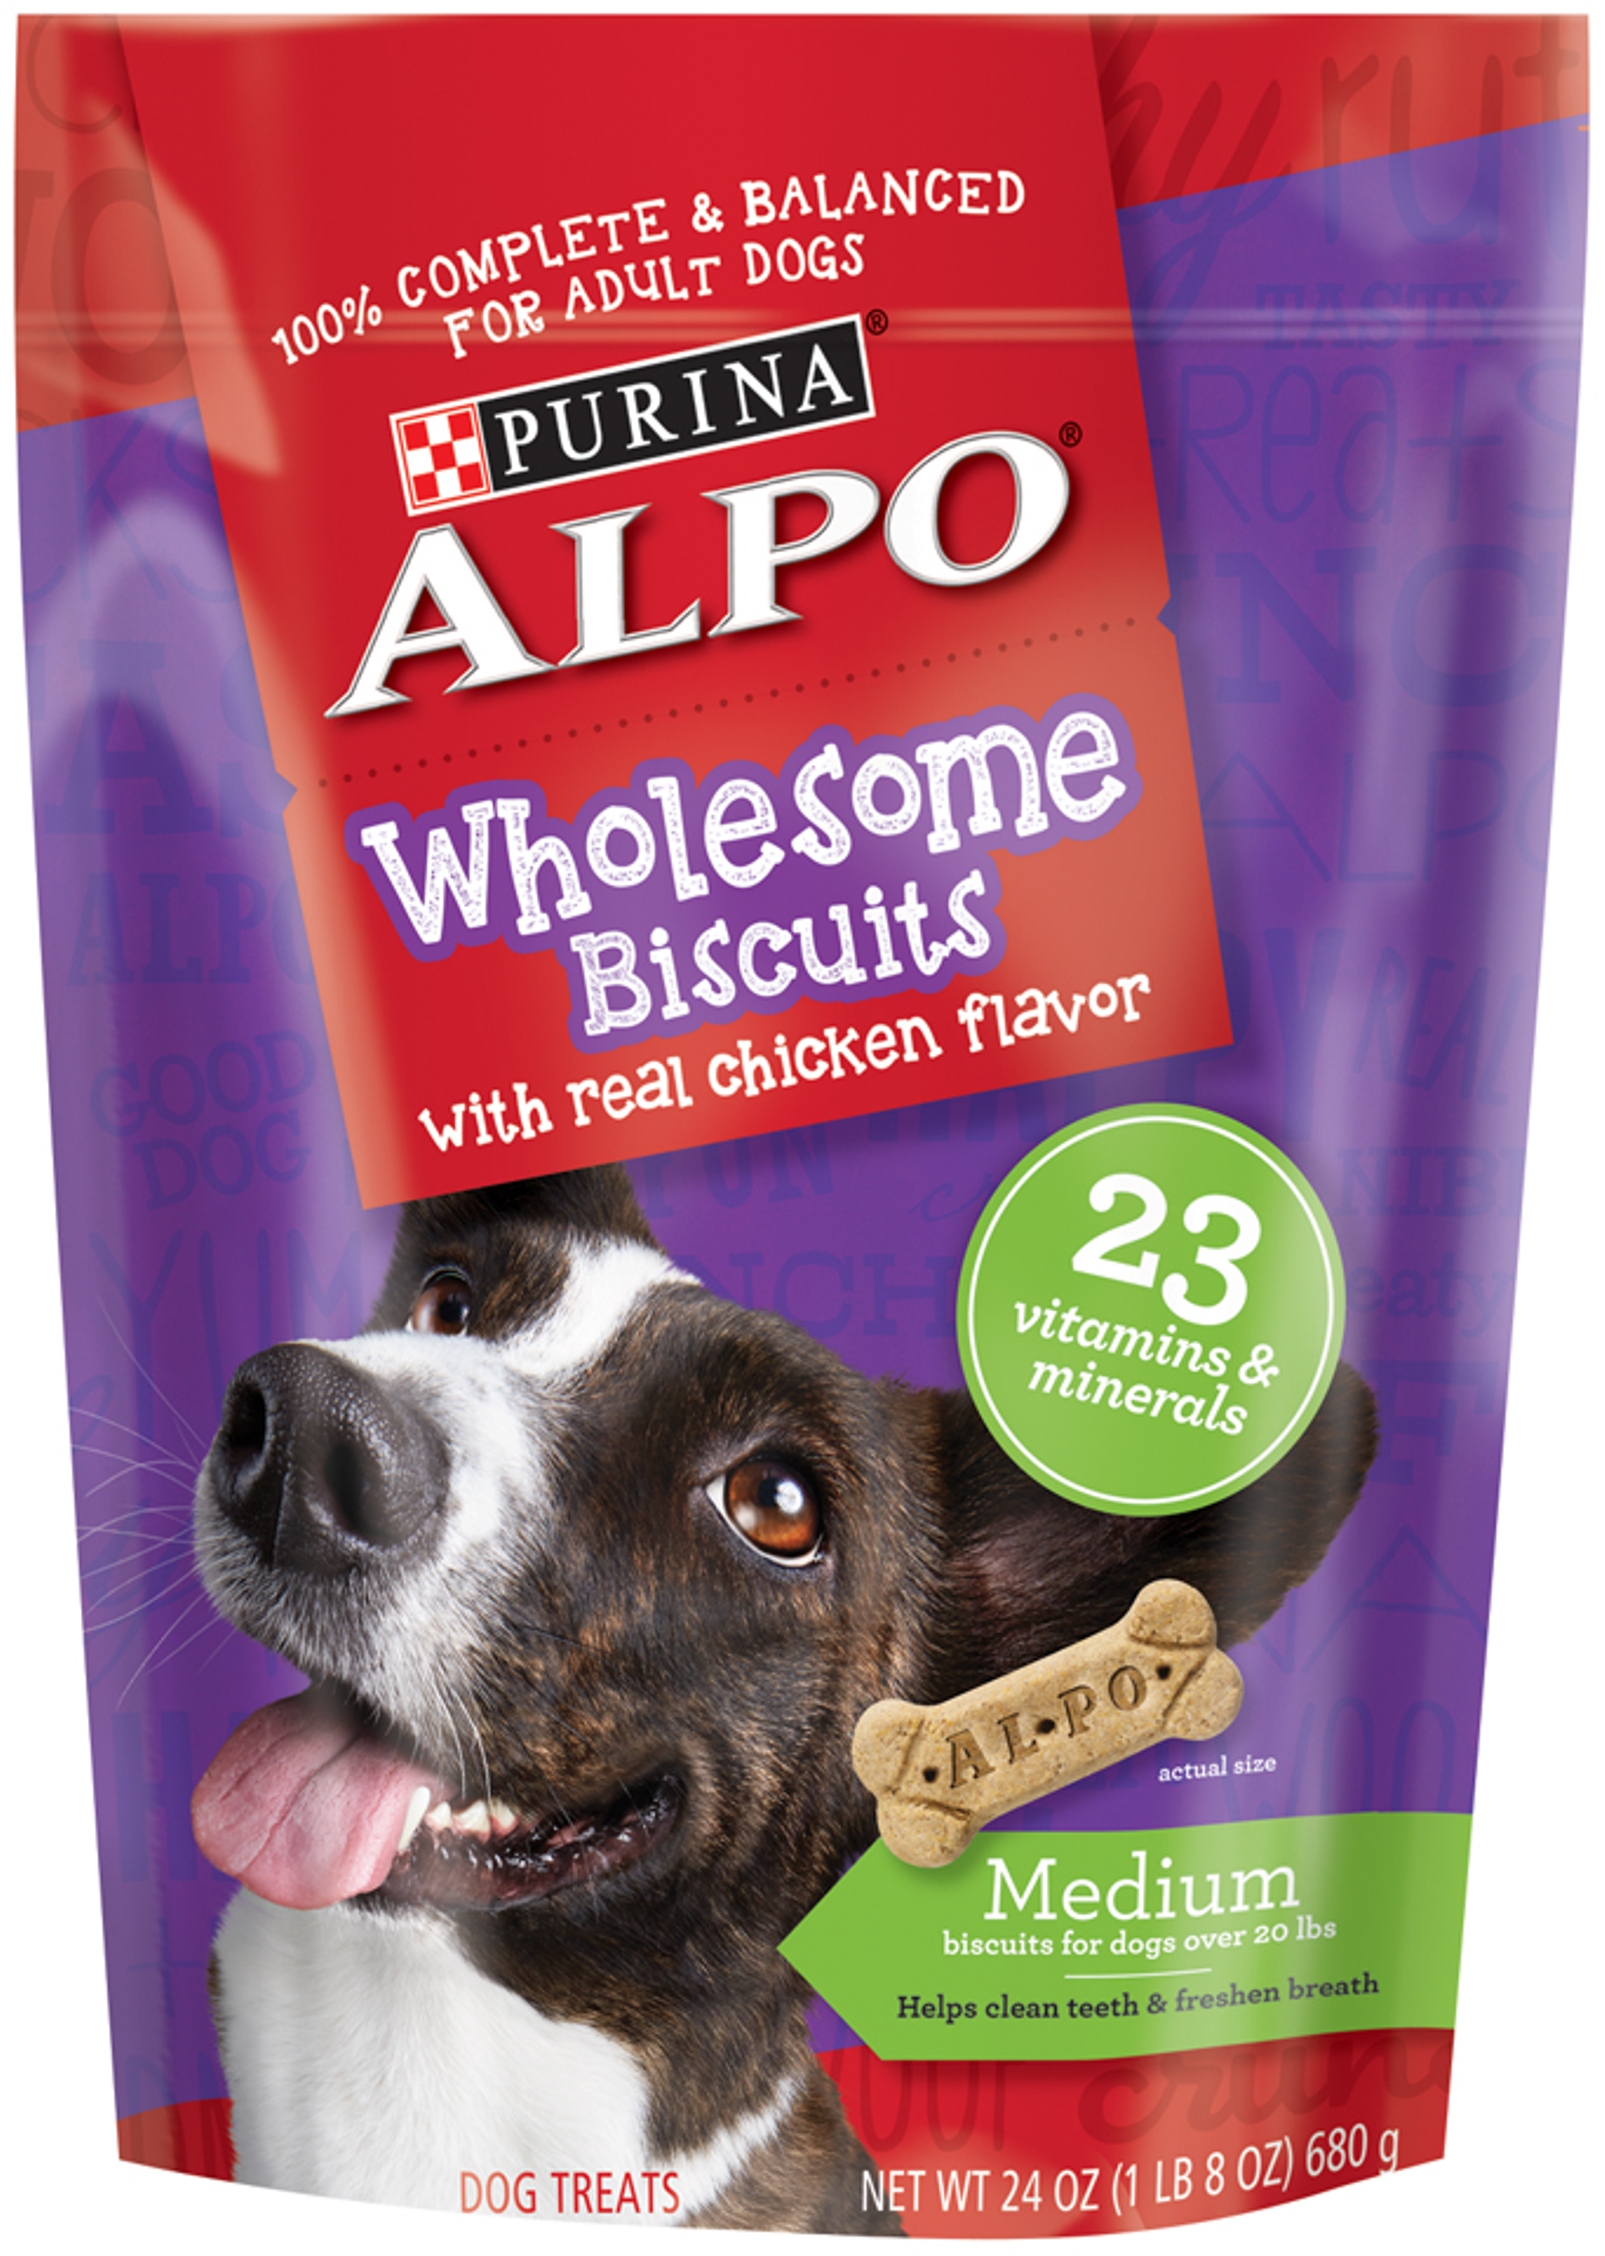 Alpo Wholesome Biscuits Medium with Real Chicken Flavor Dog Treats, 24 Oz.